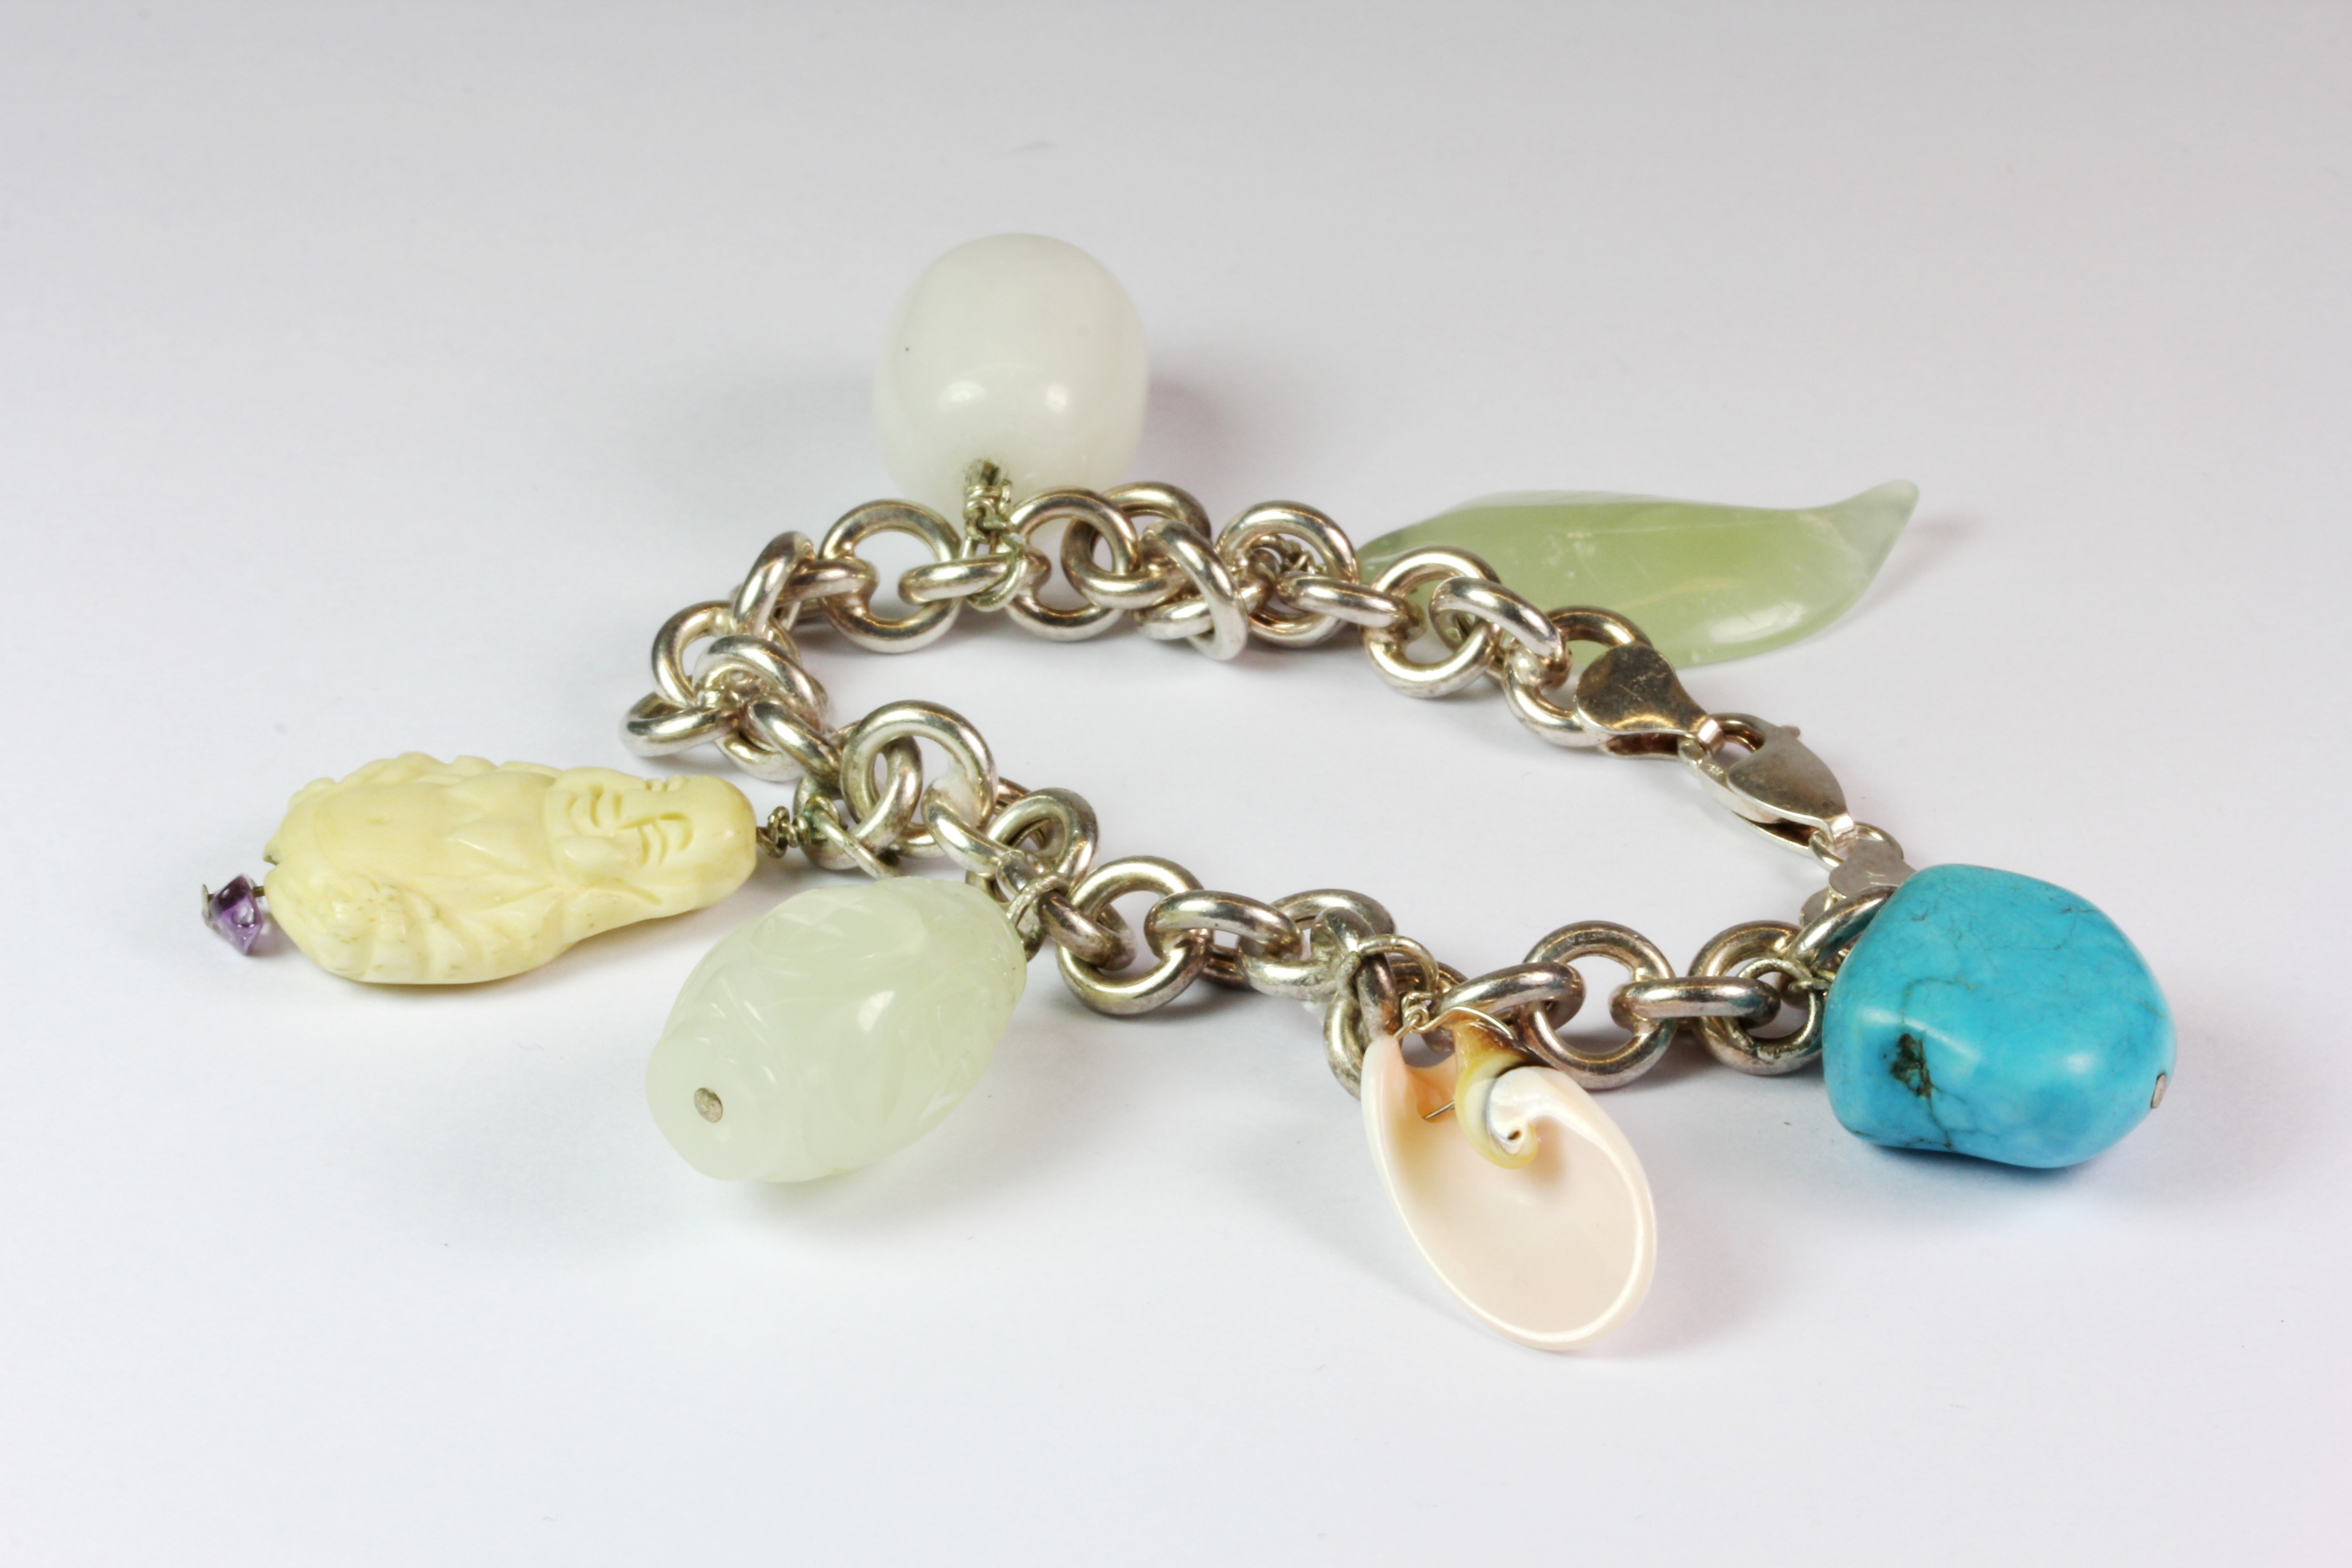 A 925 silver charm bracelet with carved jade and other stone charms.